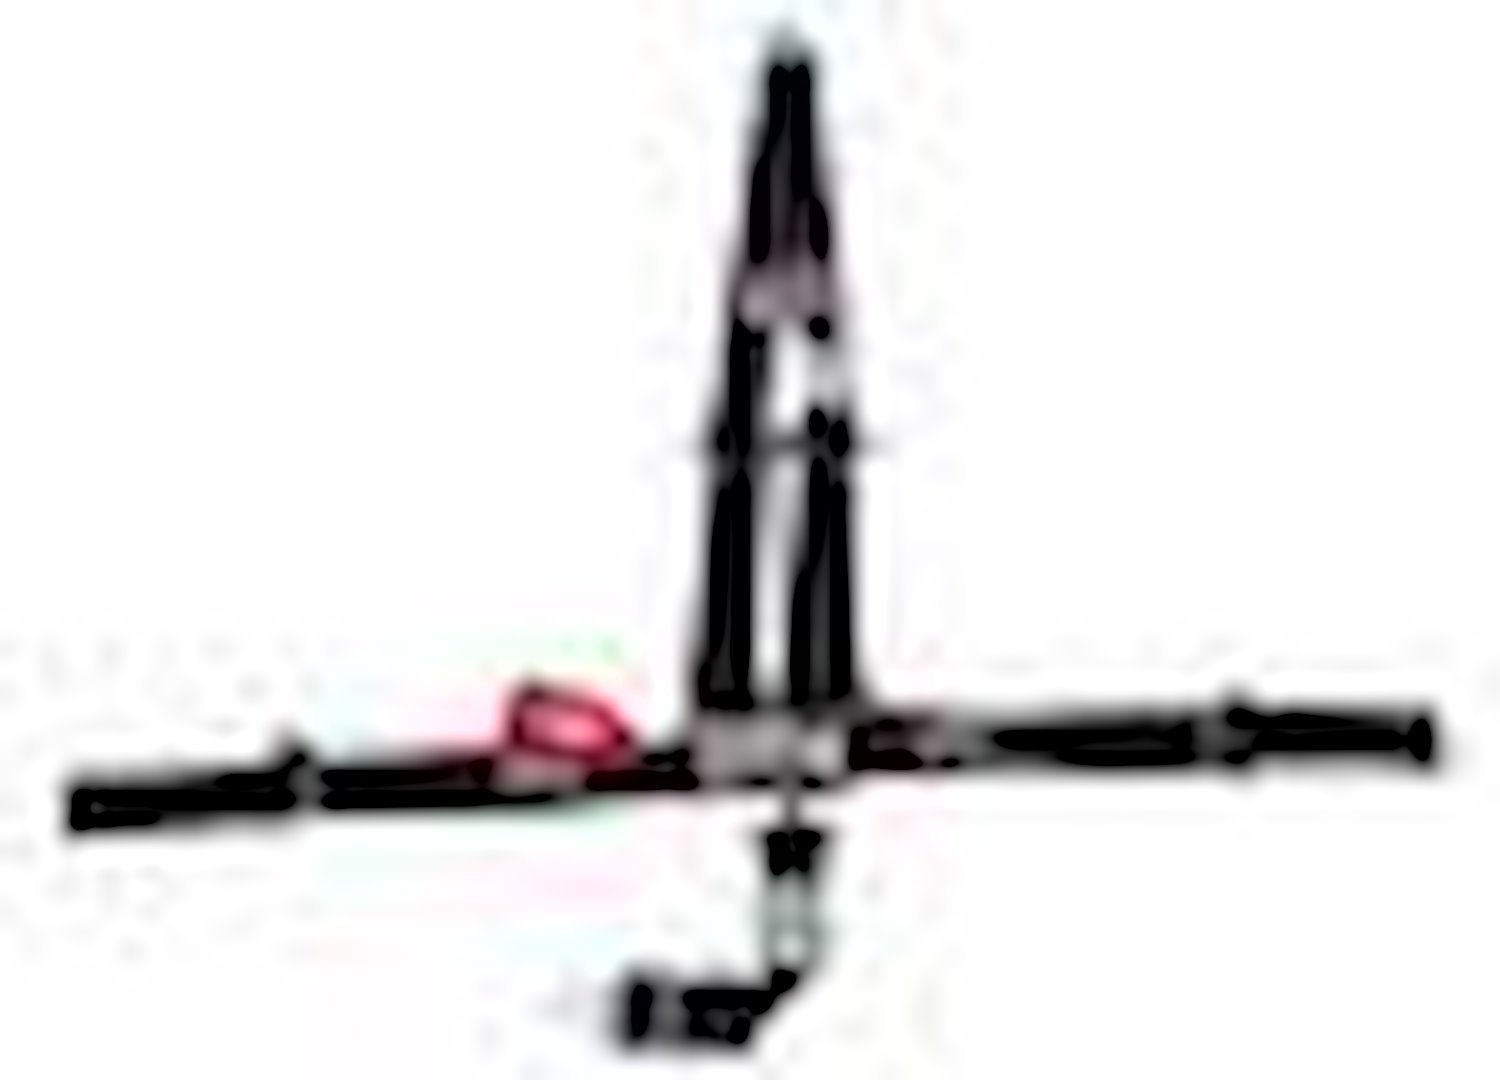 SFI 16.1 L&L HARNESS 2 PULL UP Lap Belt 2 Shoulder Harness V ROLL BAR Mount 2 DOUBLE Sub ALL SNAP ENDS w/STERNUM STRAP HOT PINK